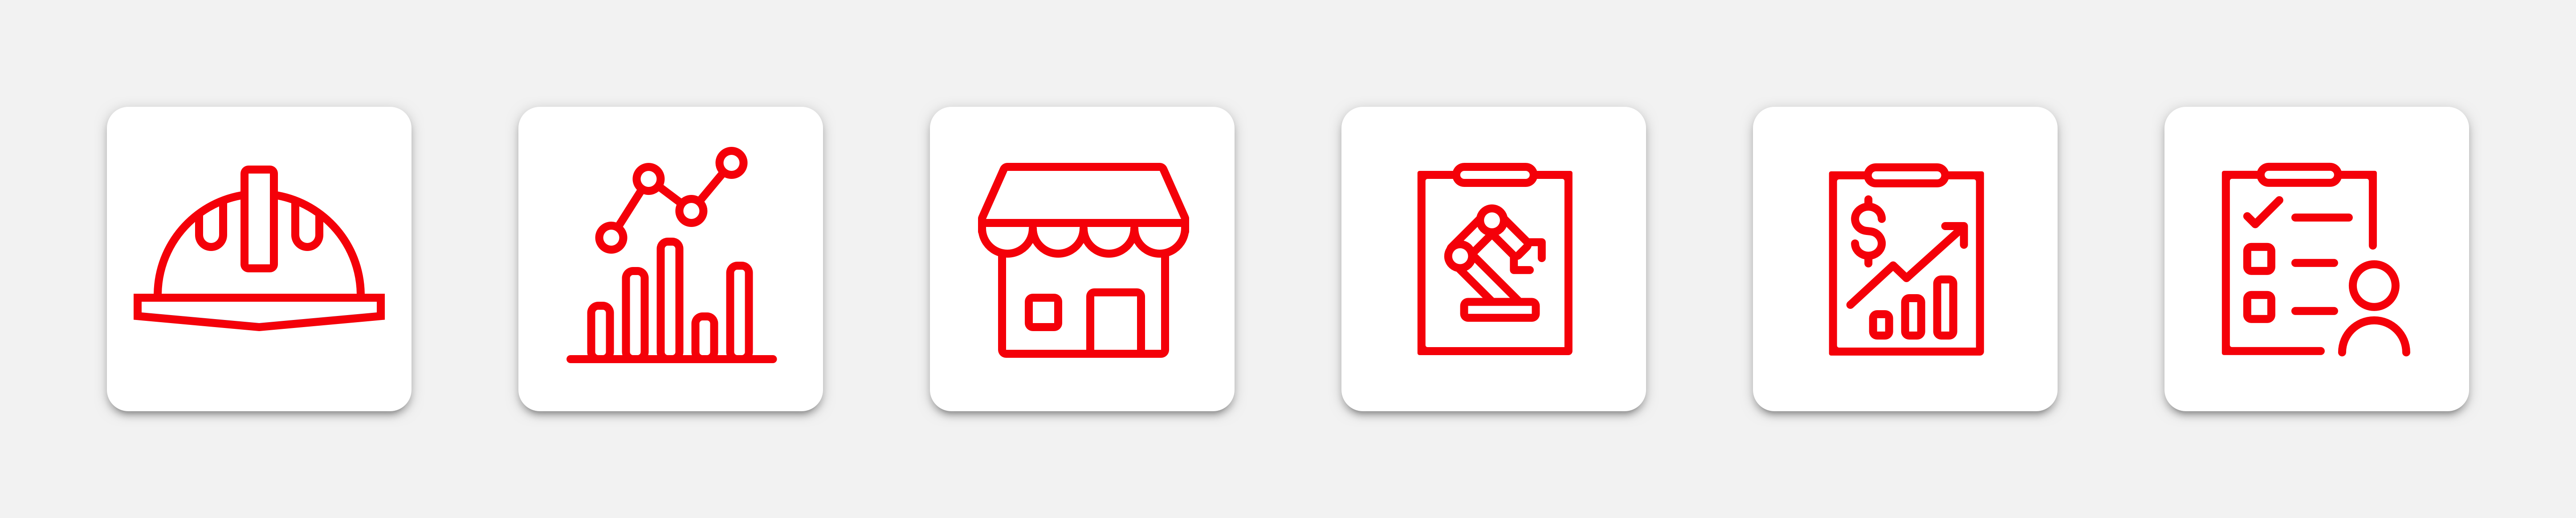 Themed product icons